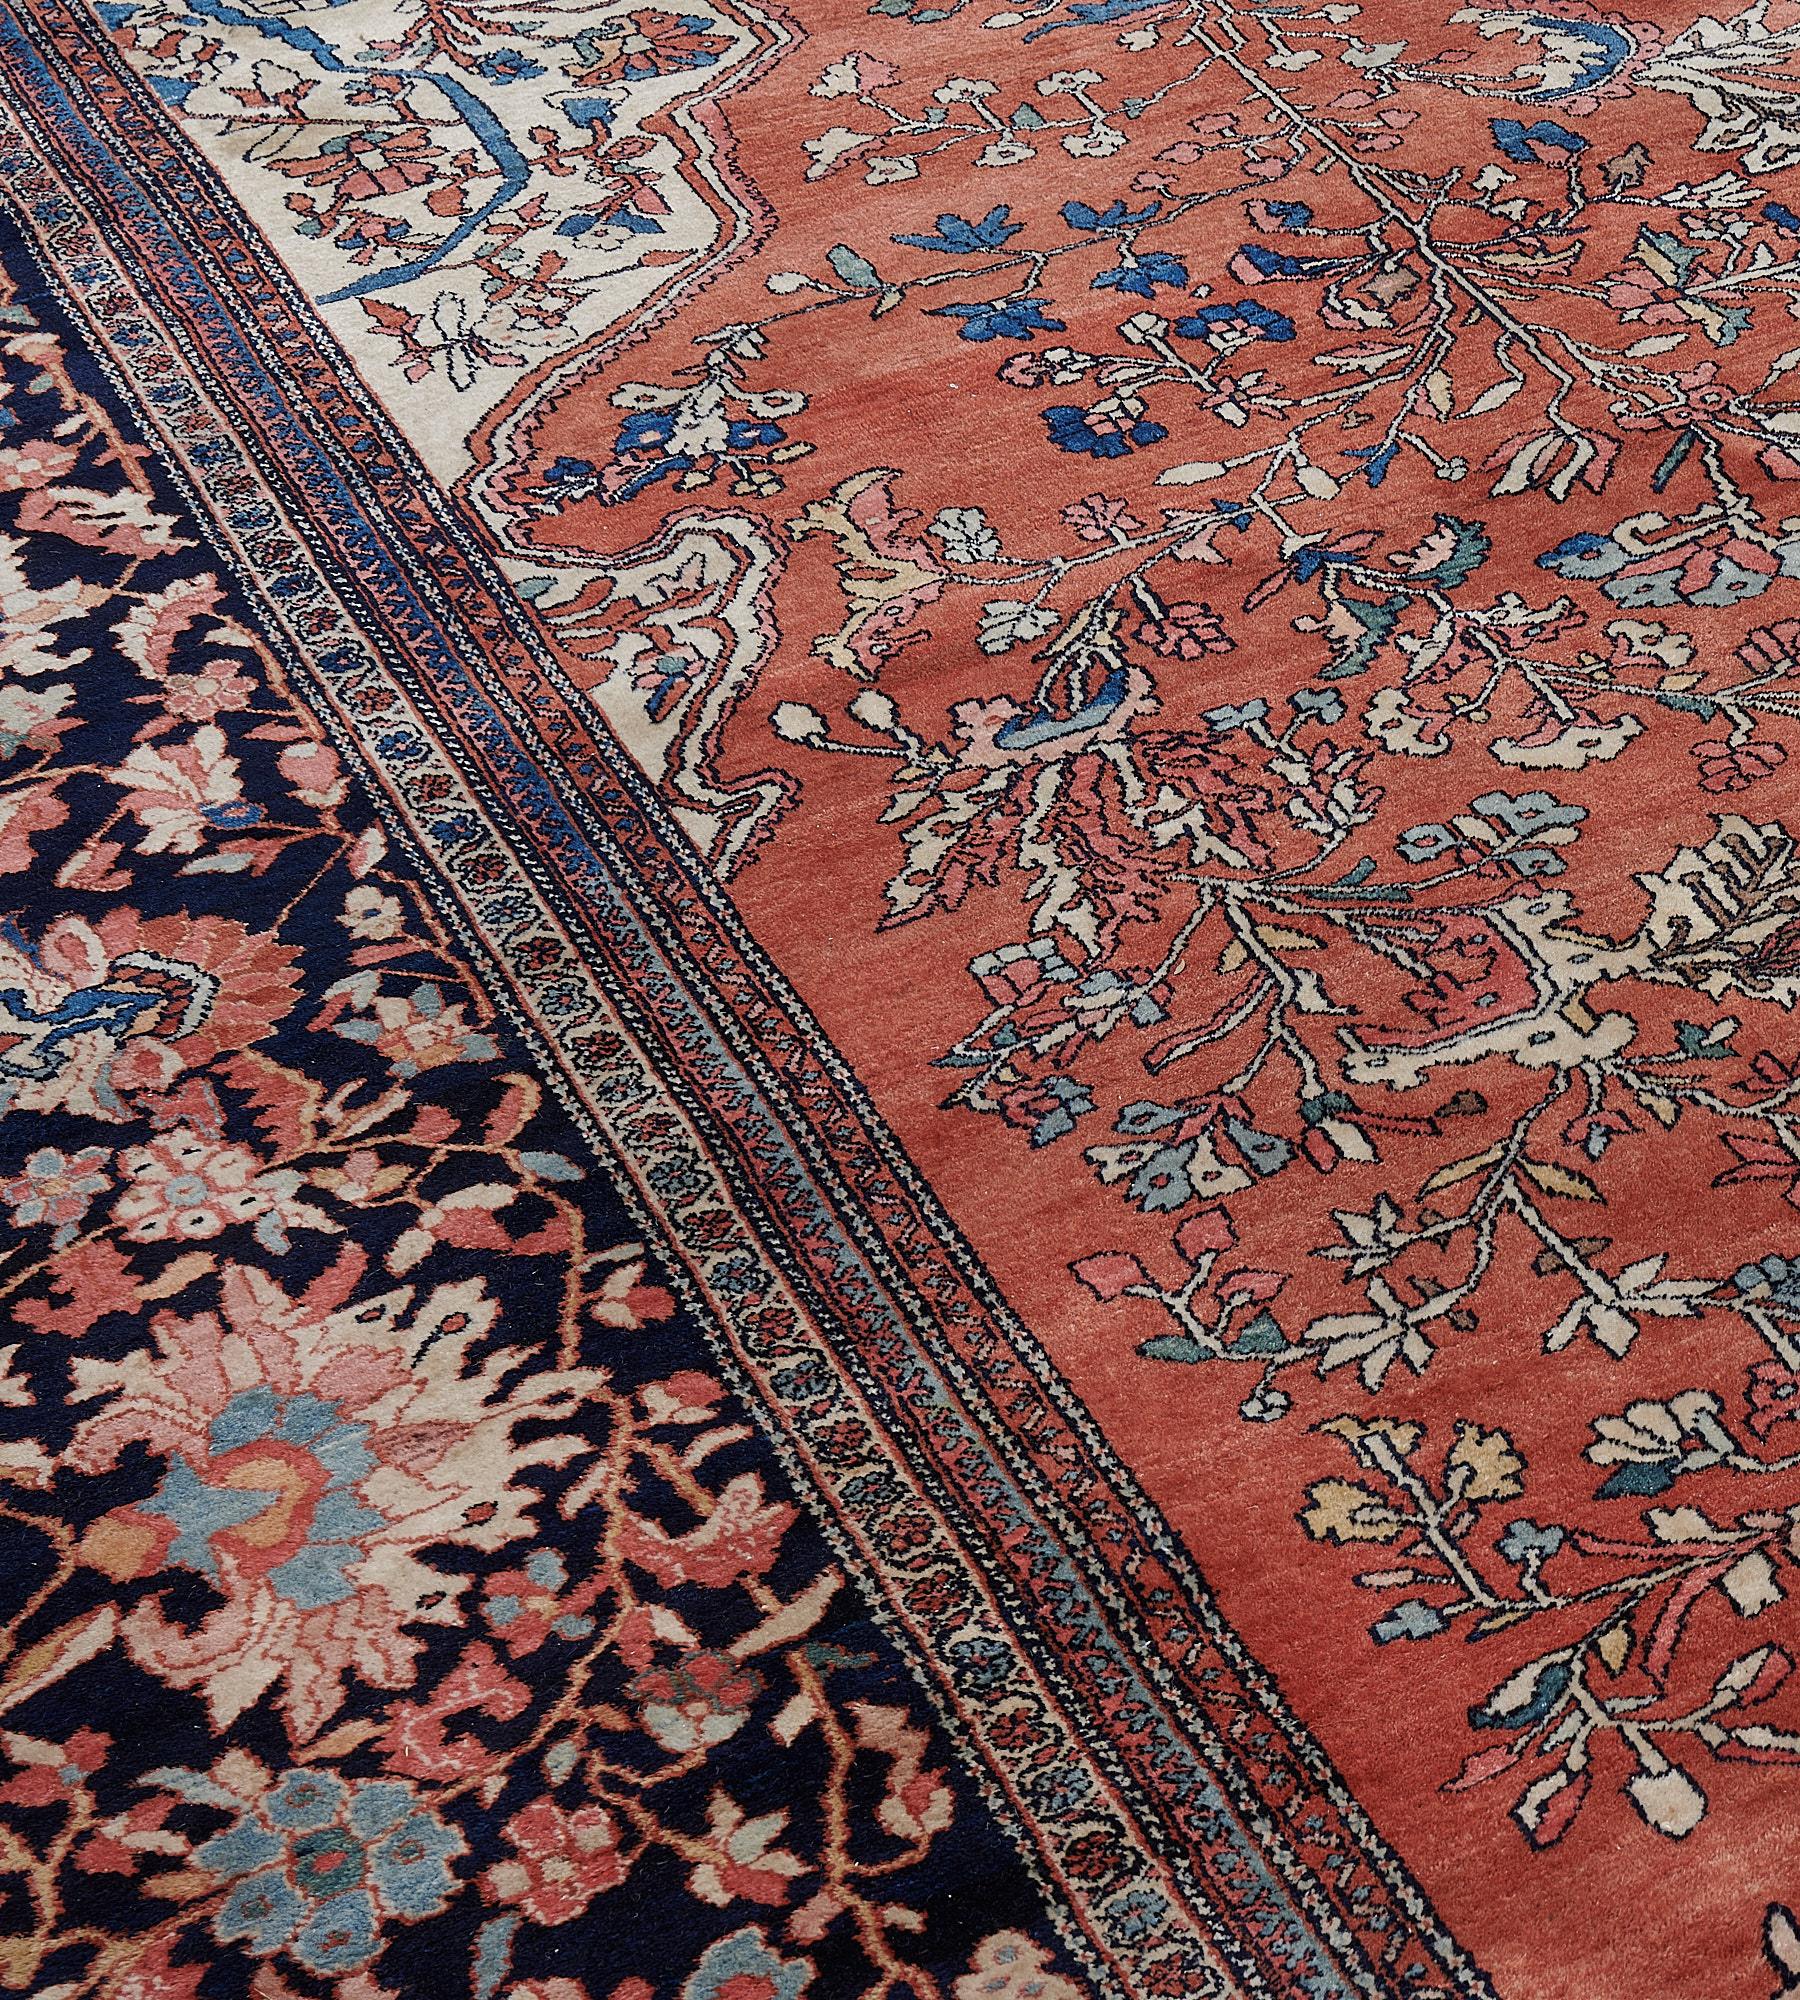 Antique Handwoven Persian Faraghan Rug in Perfect Condition For Sale 3